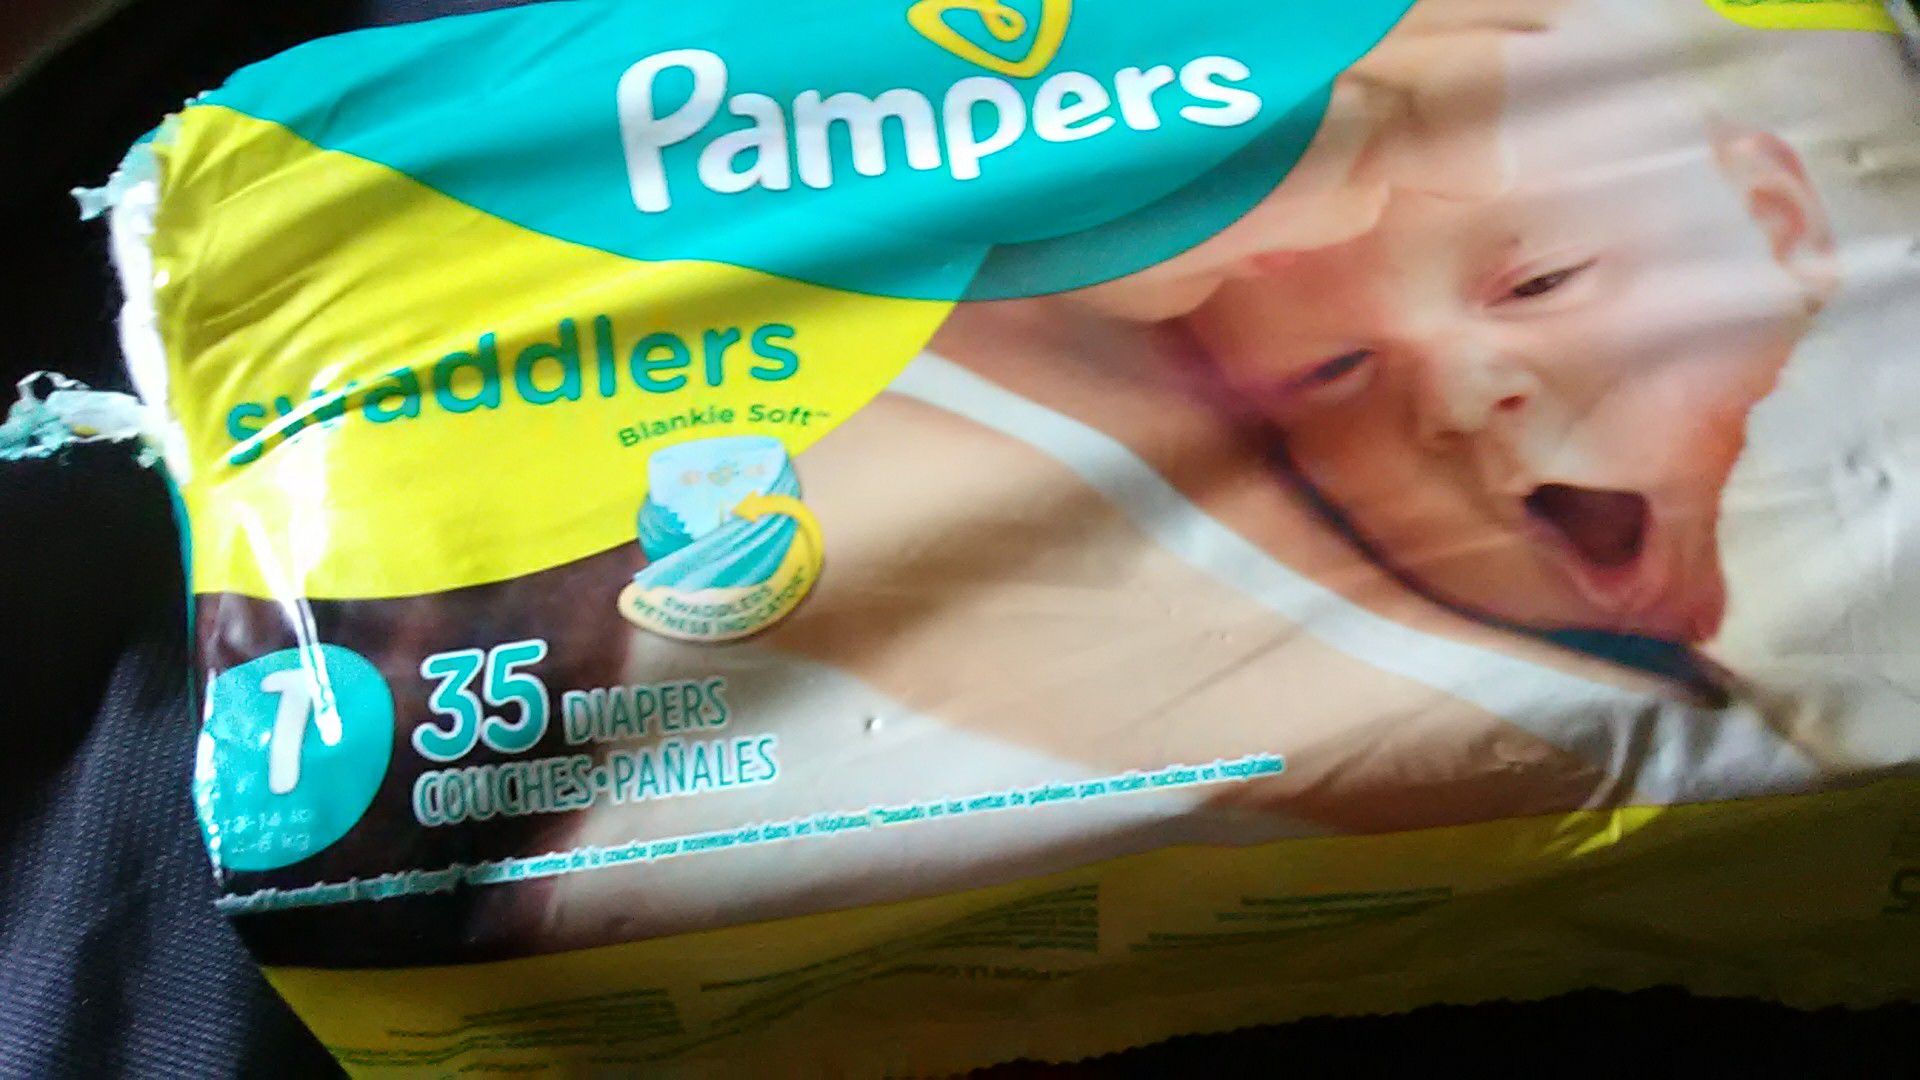 Pampers size one diapers